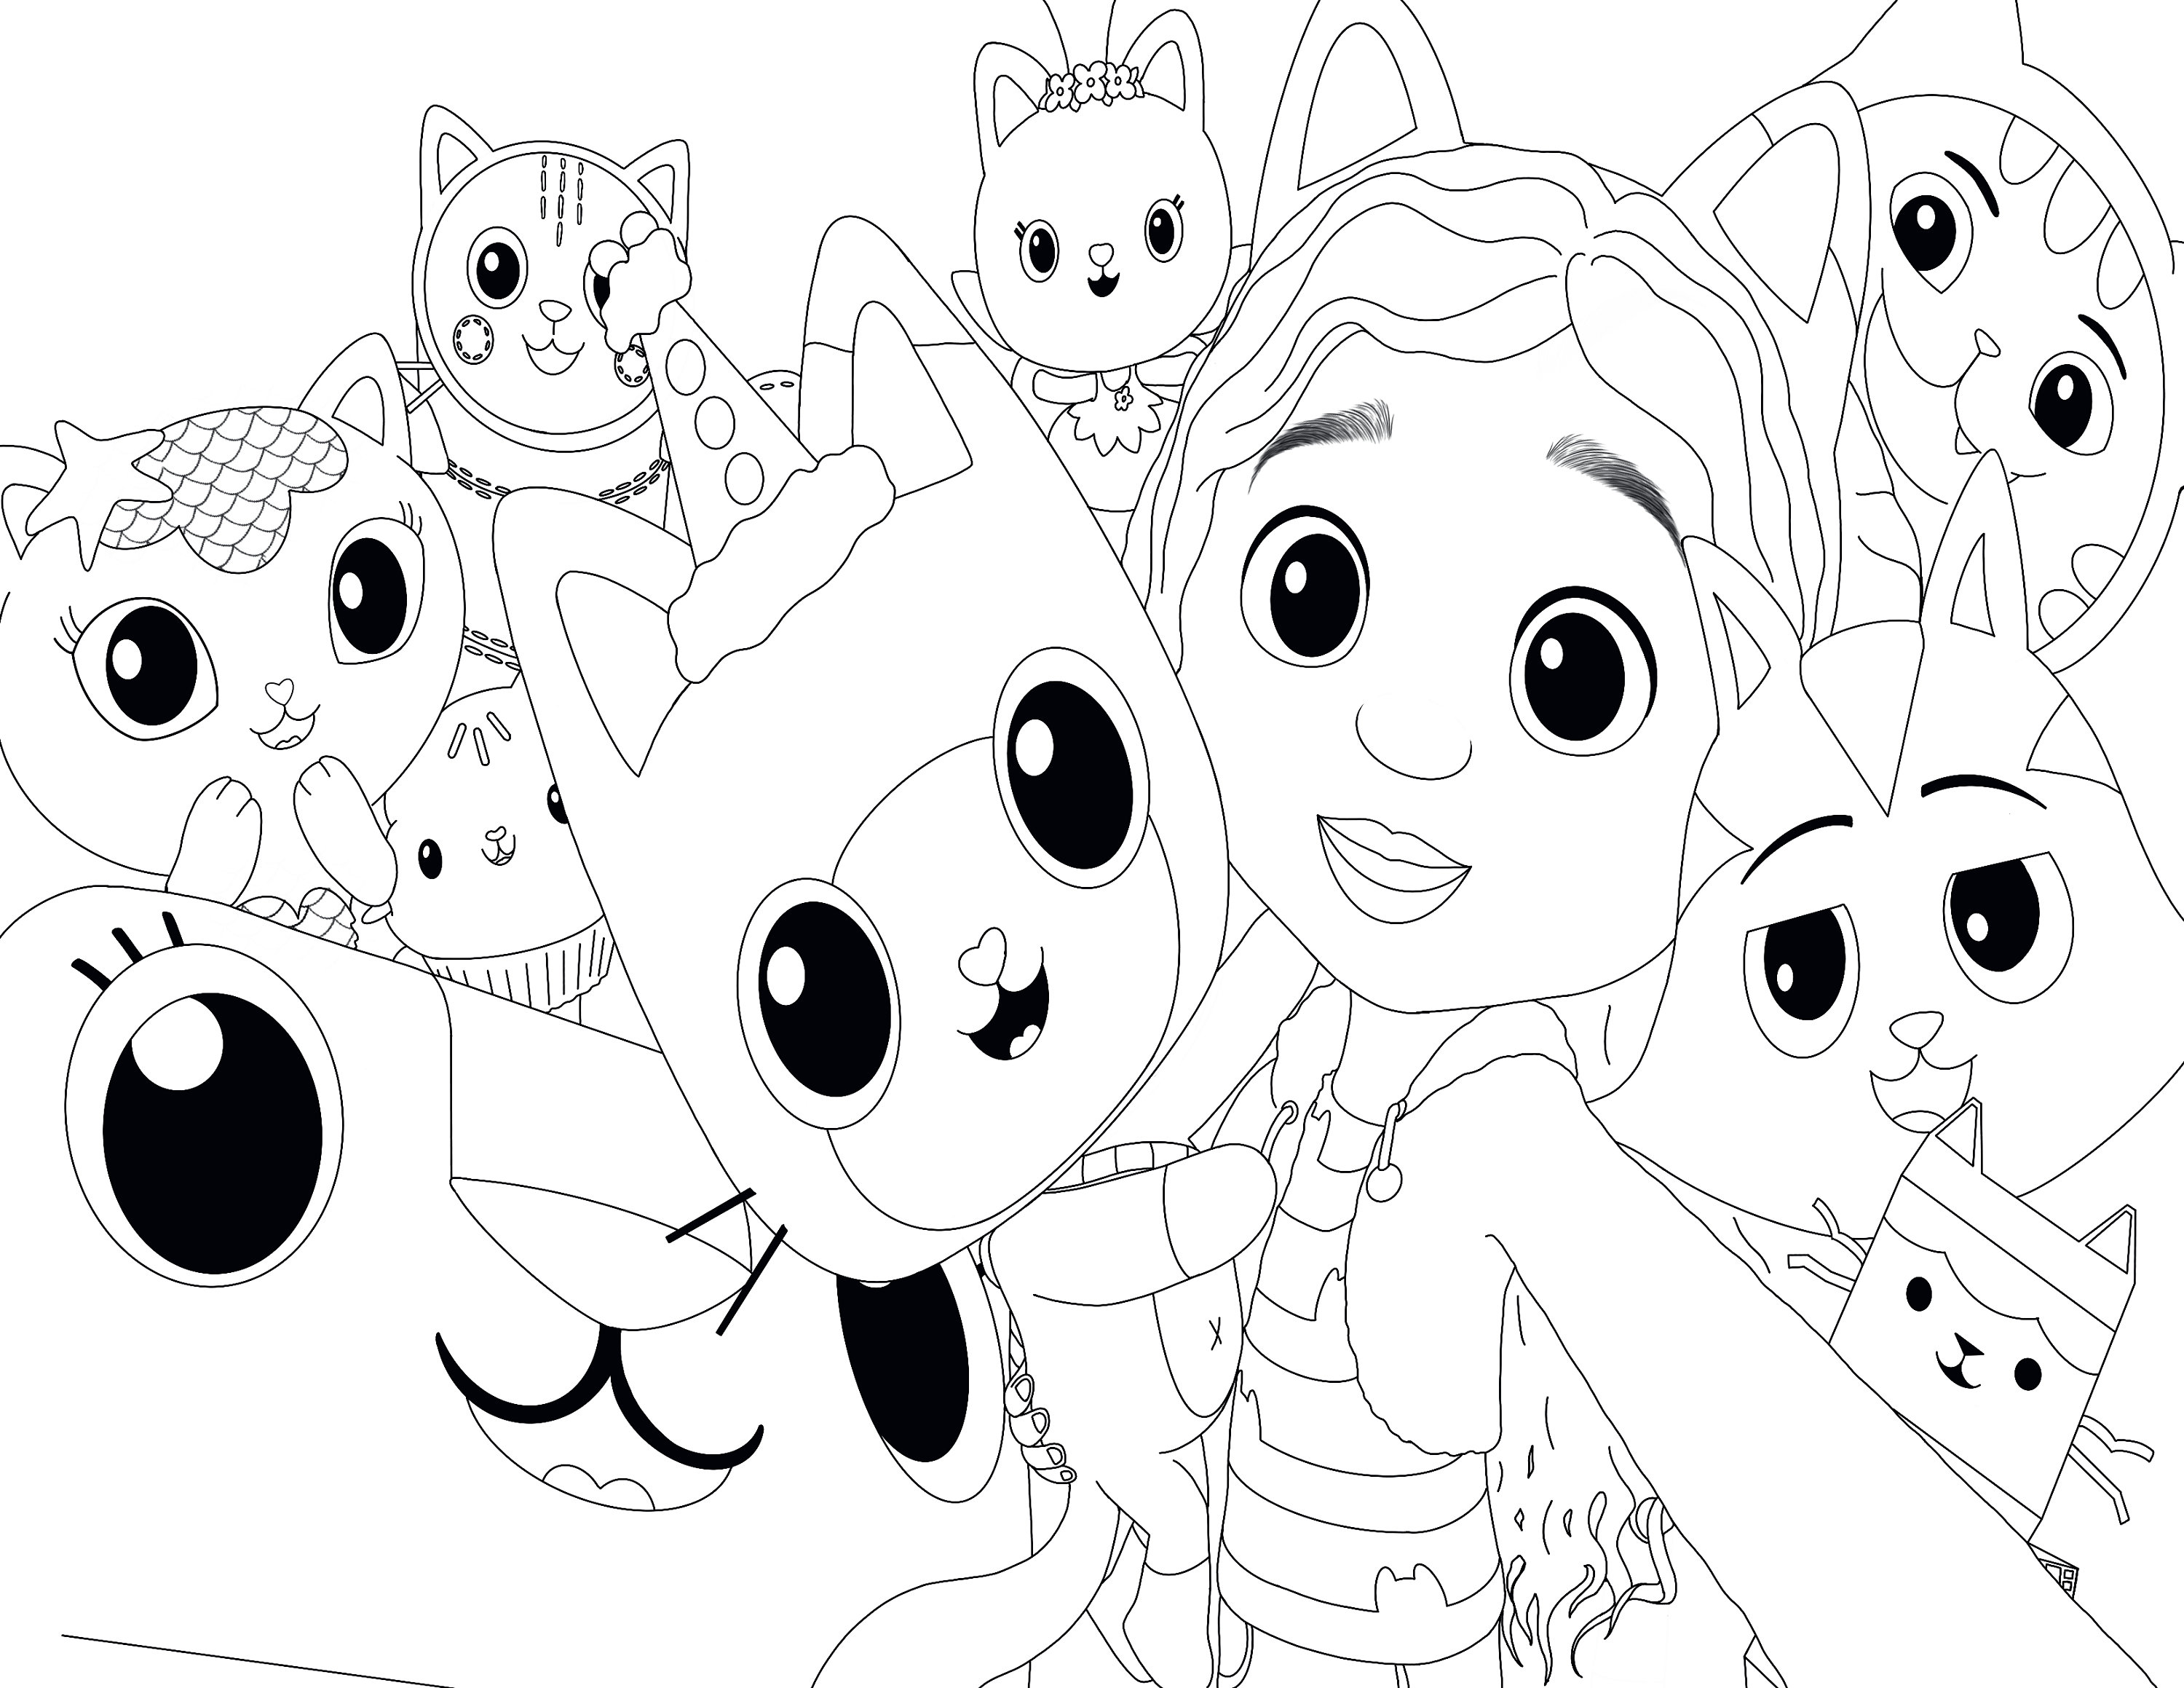 Gabbys doll house digital coloring page download